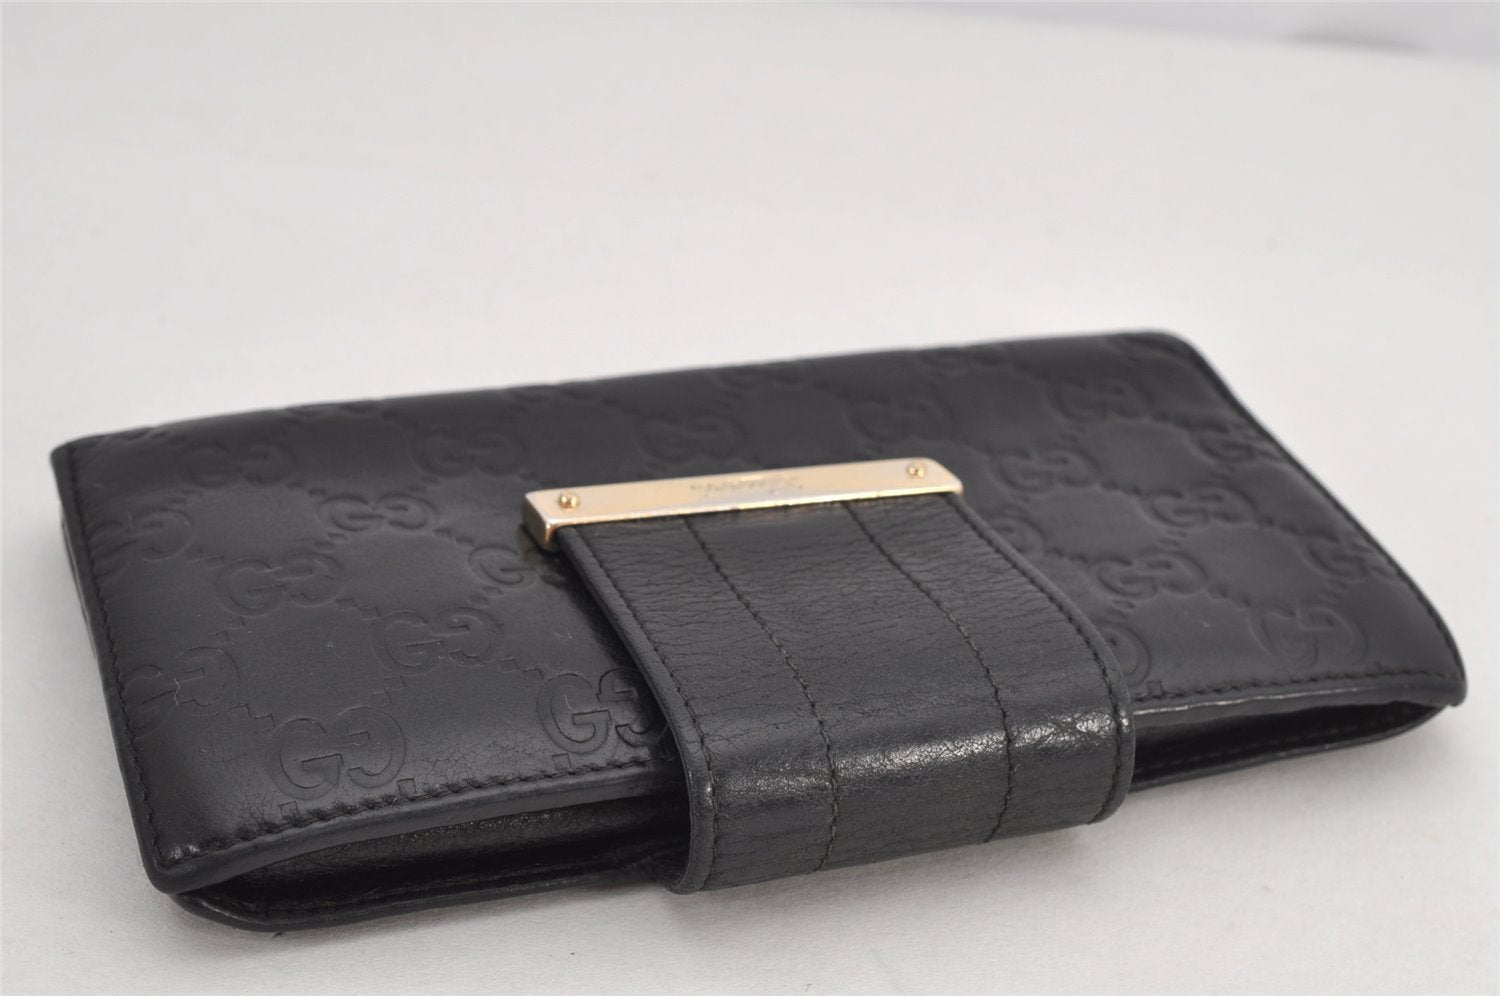 Authentic GUCCI Guccissima GG Leather Long Wallet Purse 181668 Black 8186J